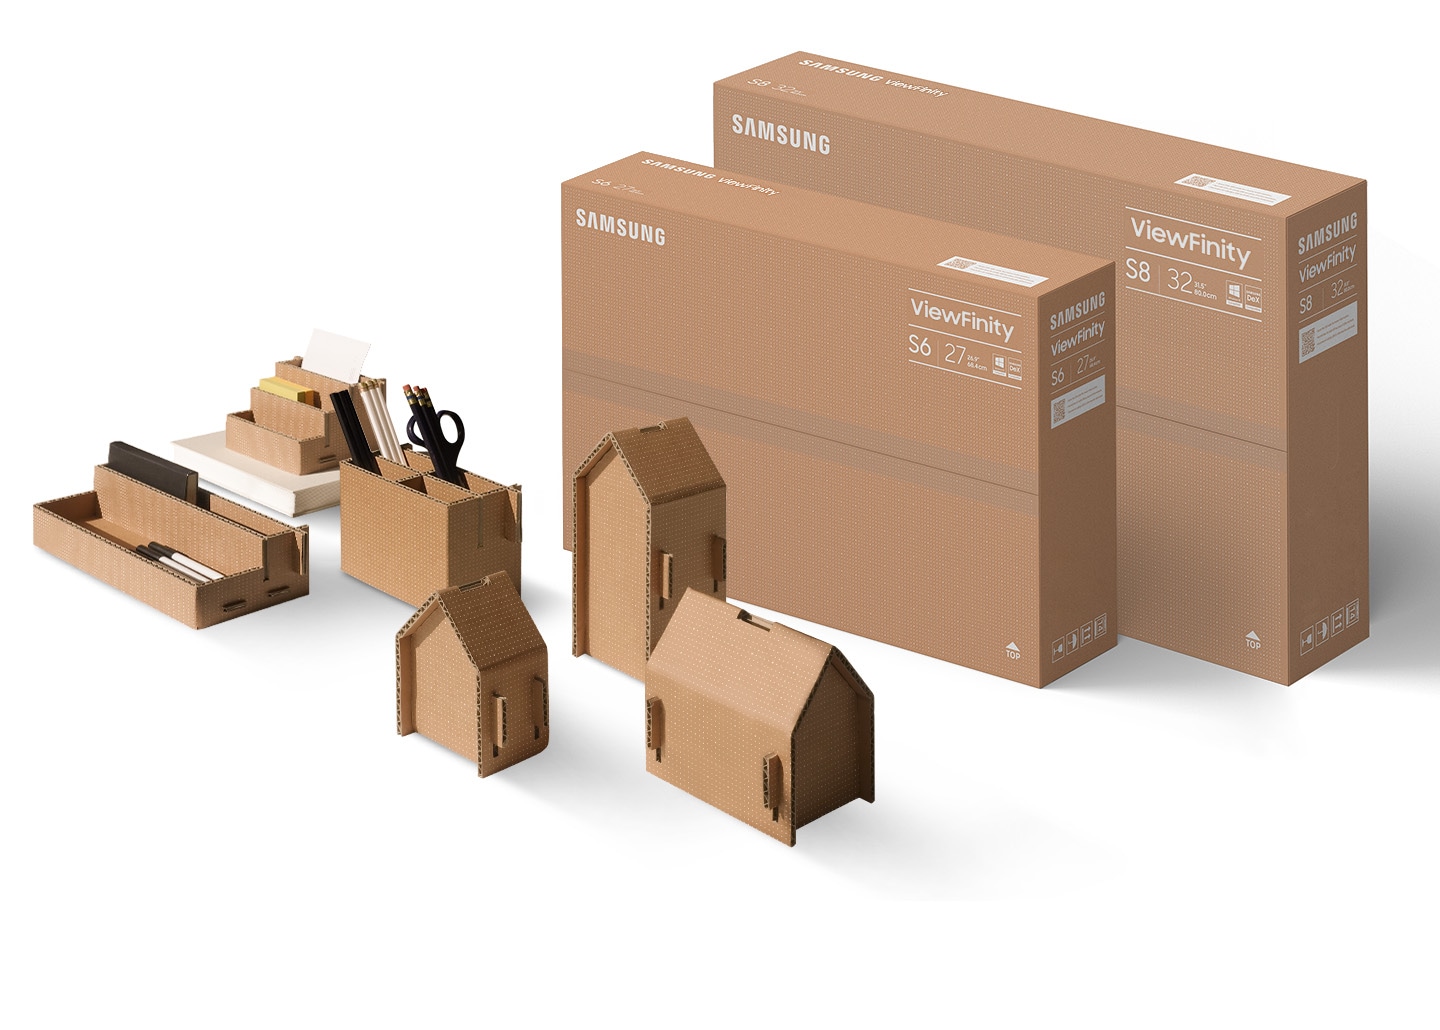 There are ViewFinity packing boxes, and in front of them are boxed pencil holders, organizers, and small items.